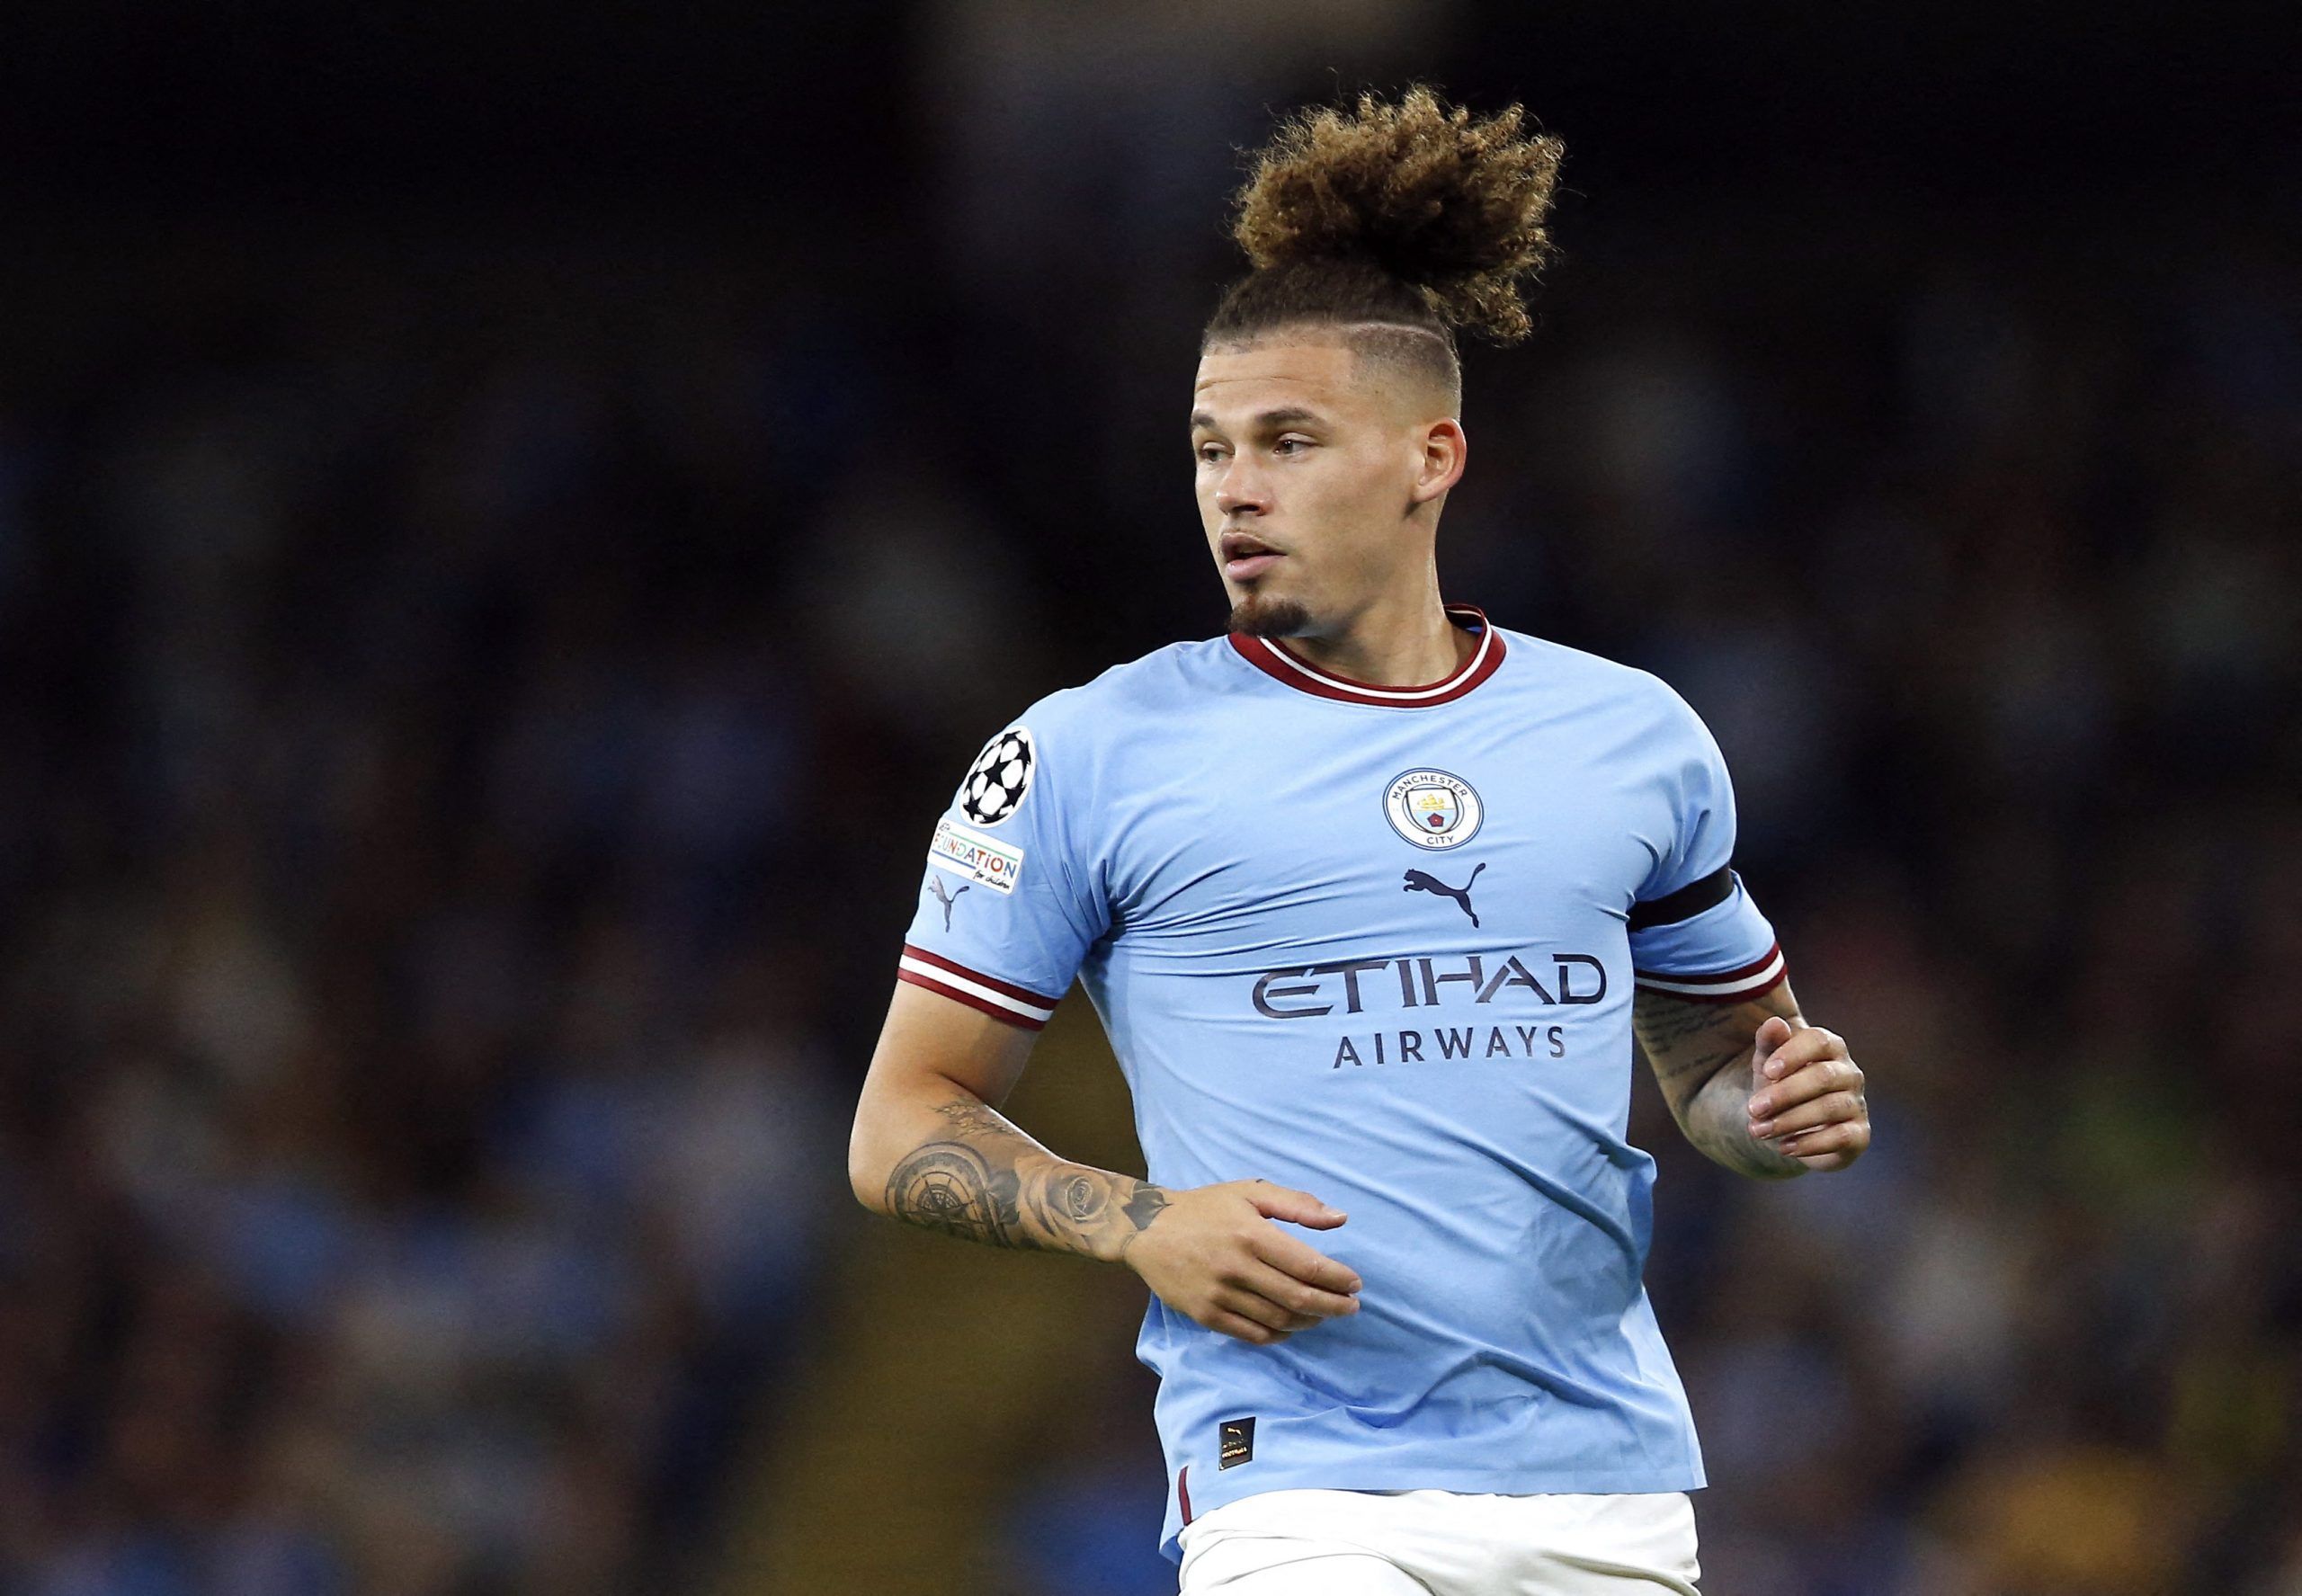 Man City: Robinson says Phillips ‘will be gutted’ after injury -Manchester City News